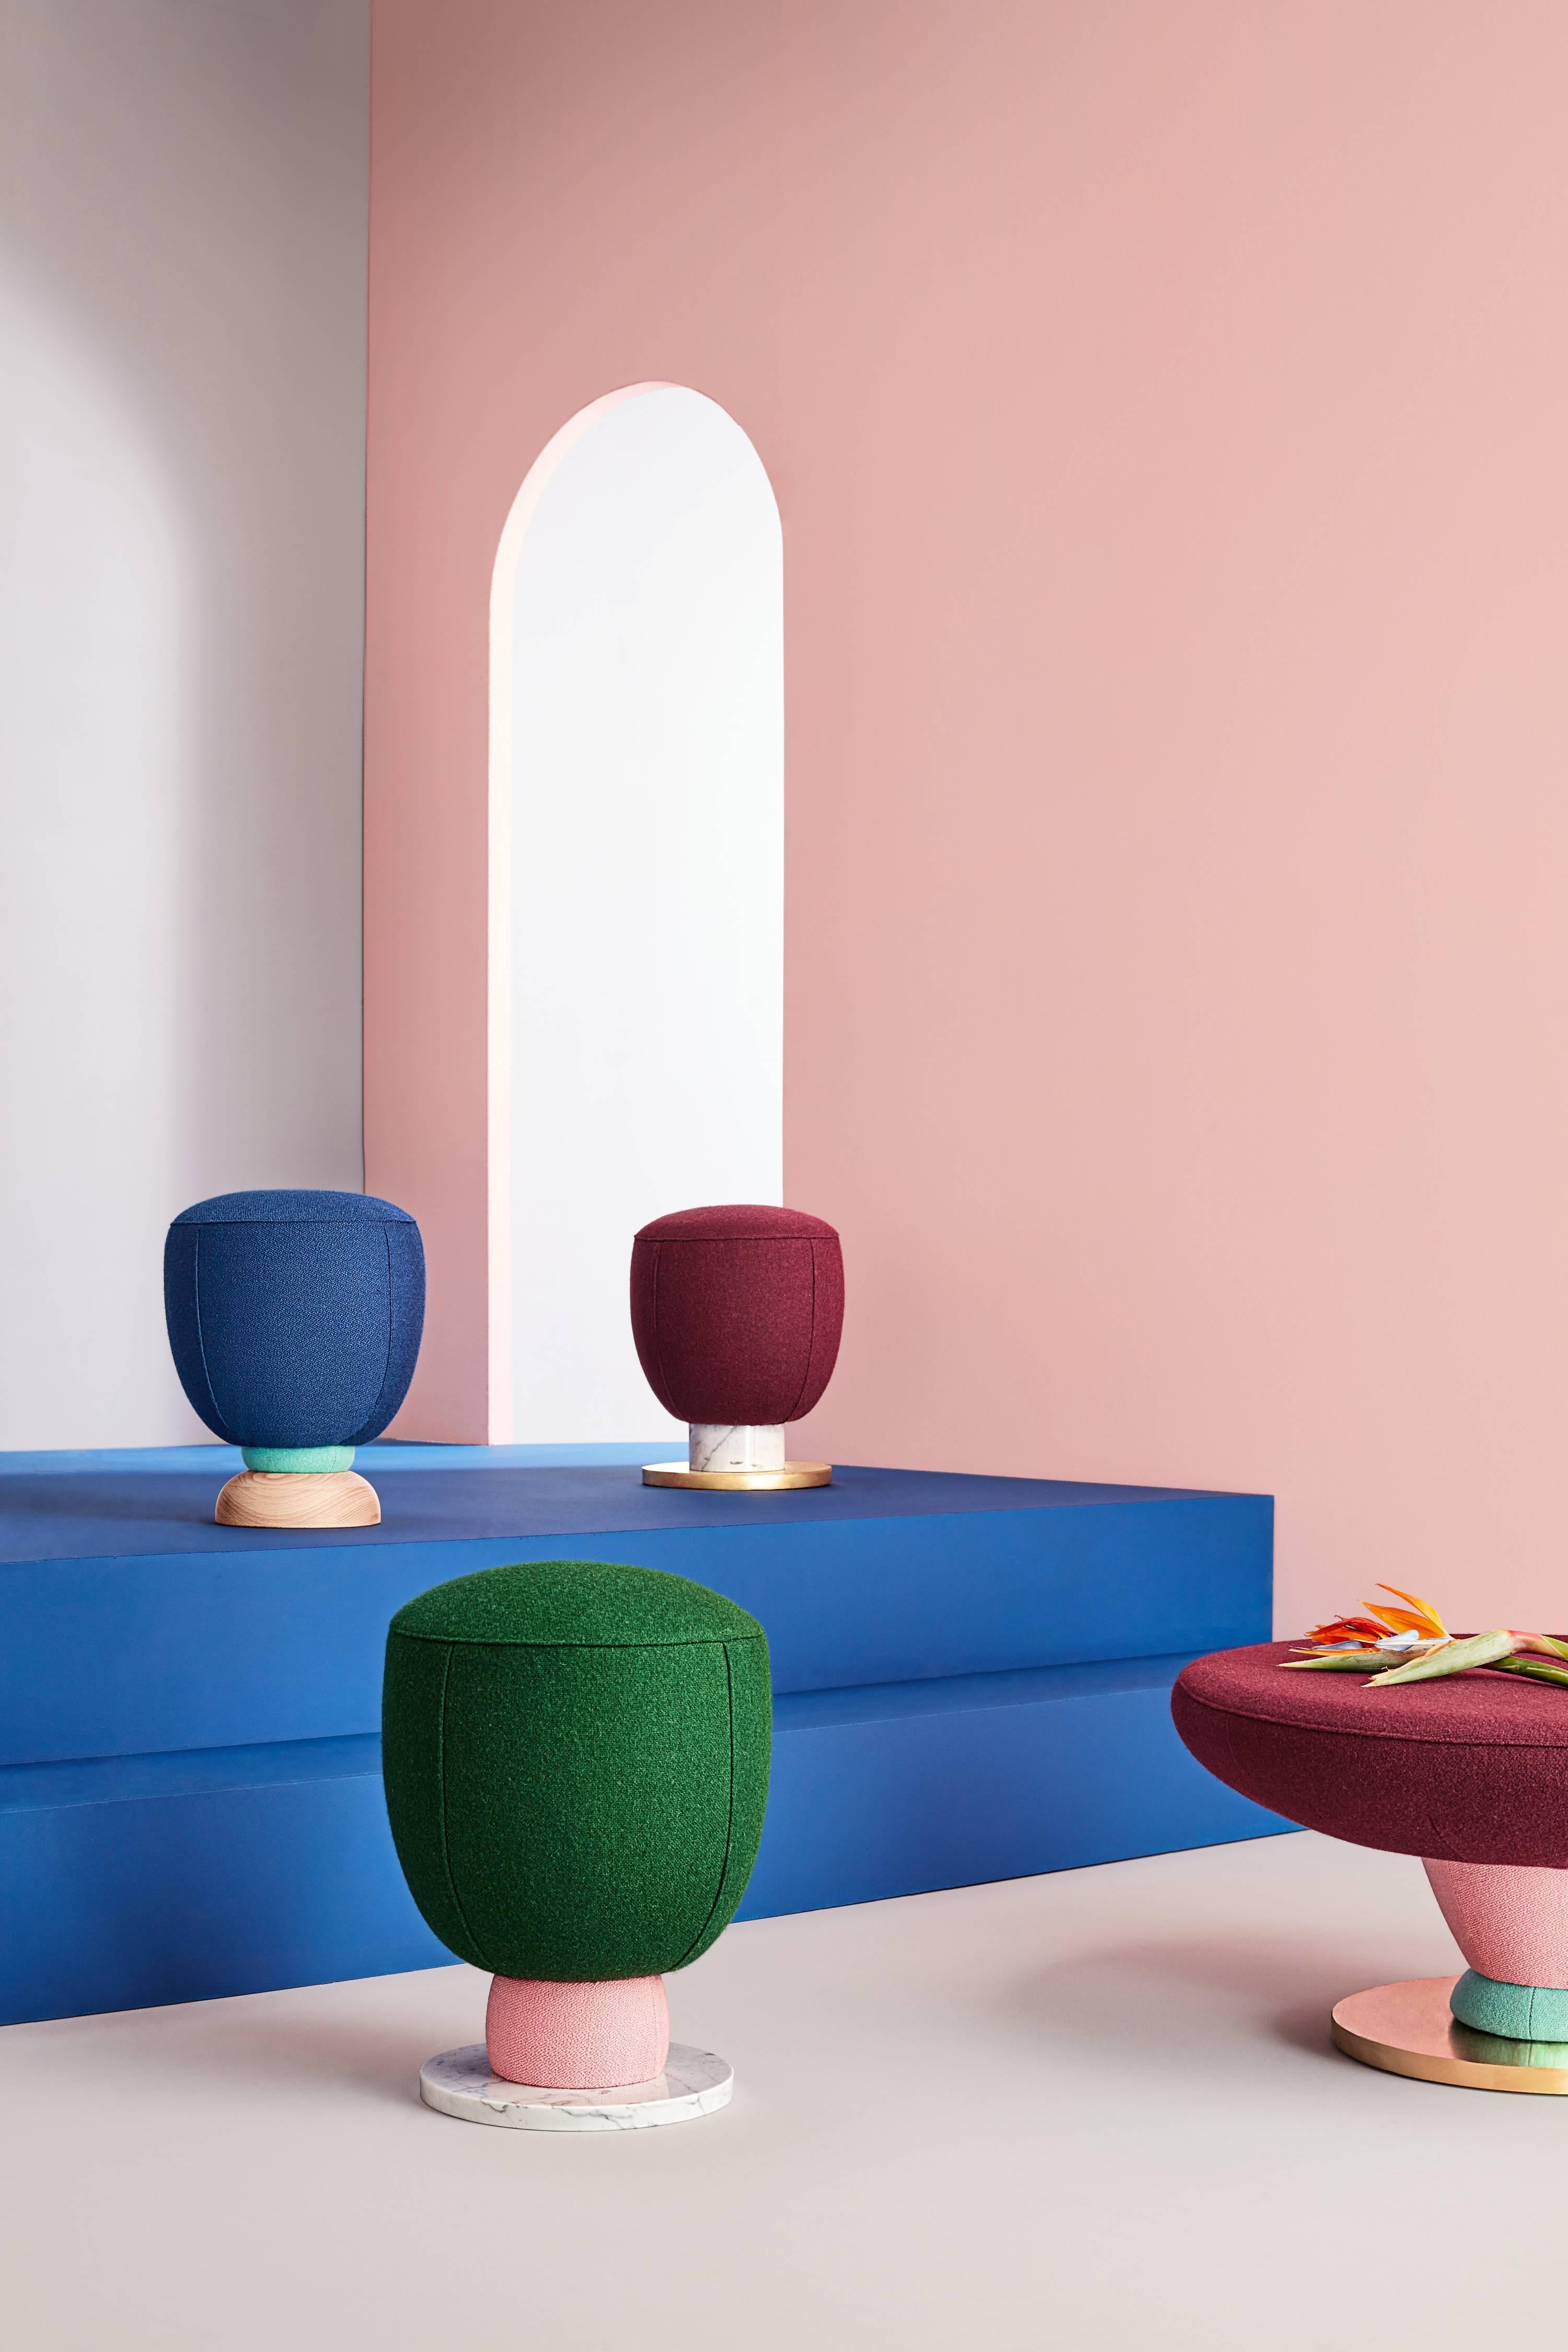 Dimensions and materials:
Measures: 43 x 37 x 37 cm
Pin and particles board wooden structure.
Fiber coated, polyurethane
3542 seat.
Wooden leg with marble base.

Toadstool collection, blue puff, Masquespacio

This collection of puffs, table